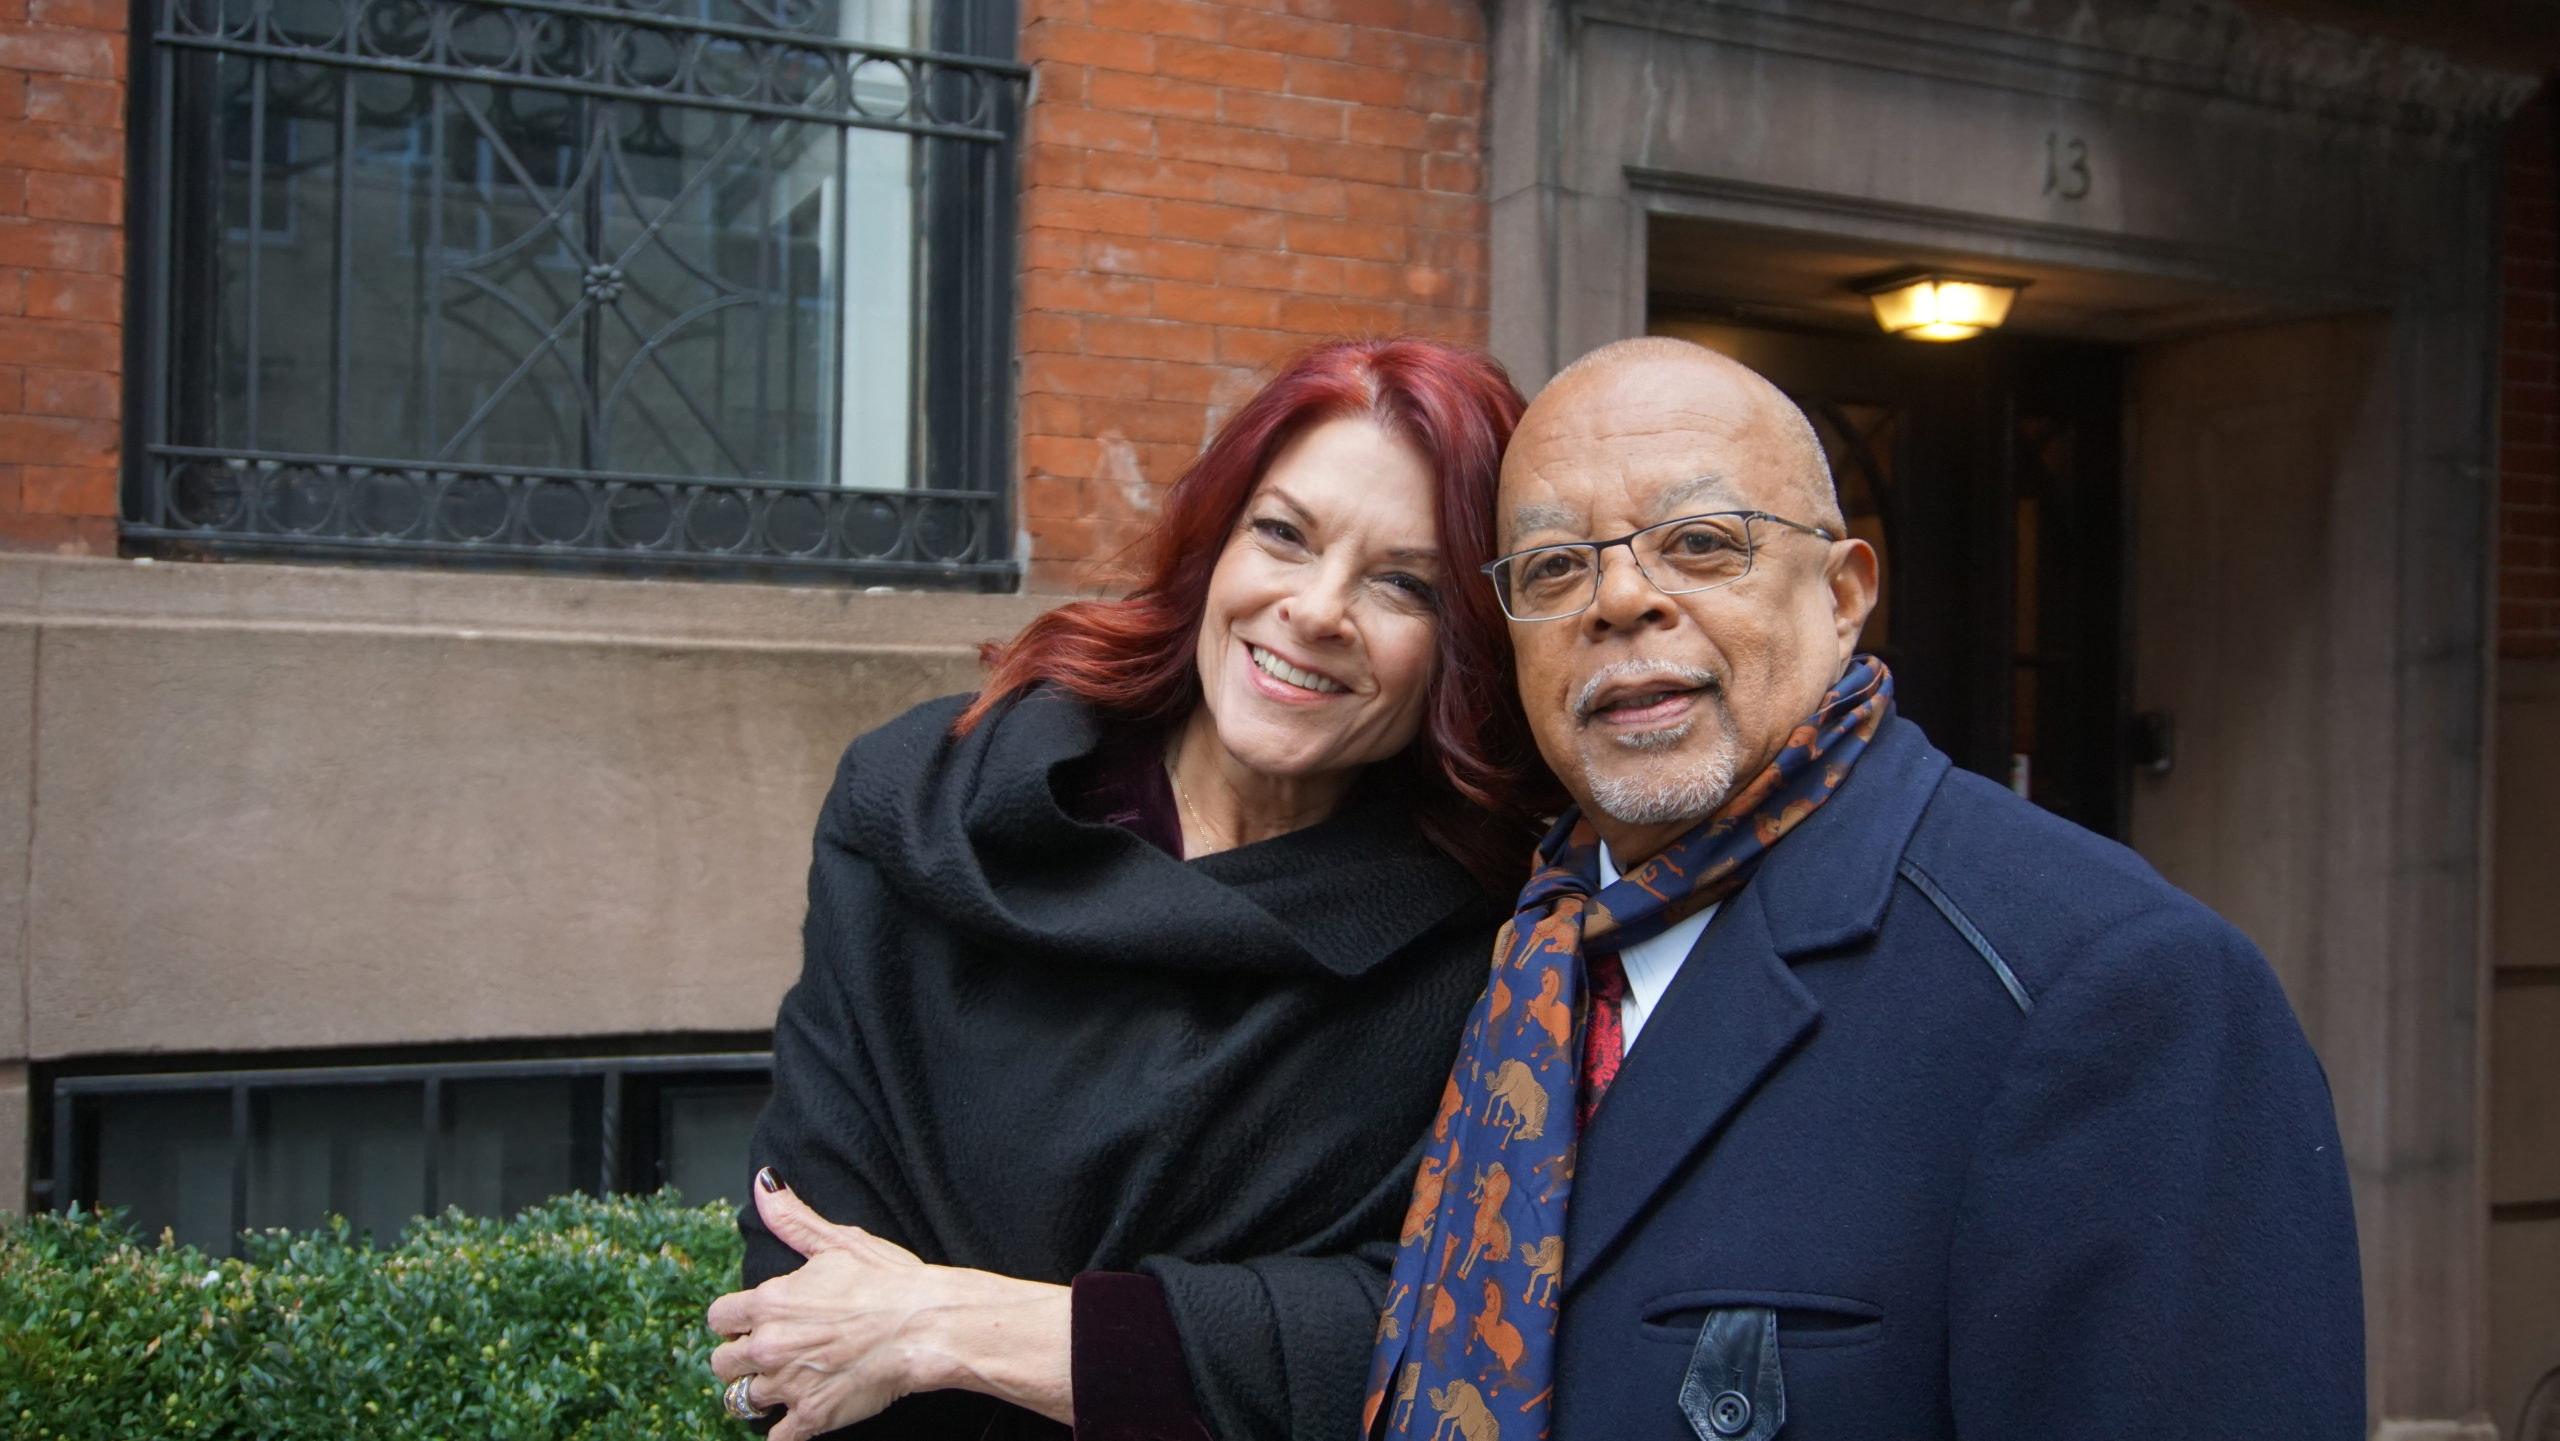 FINDING YOUR ROOTS WITH HENRY LOUIS GATES, JR. 
Season Seven
Premieres January 19 – May 4, 2021

Country music artist Rosanne Cash with host Henry Louis Gates, Jr.

Photo courtesy of McGee Media

For editorial use only in conjunction with the direct publicity or promotion of this program for a period of three years from the program's original broadcast date, unless otherwise noted. No other rights are granted. All rights reserved.